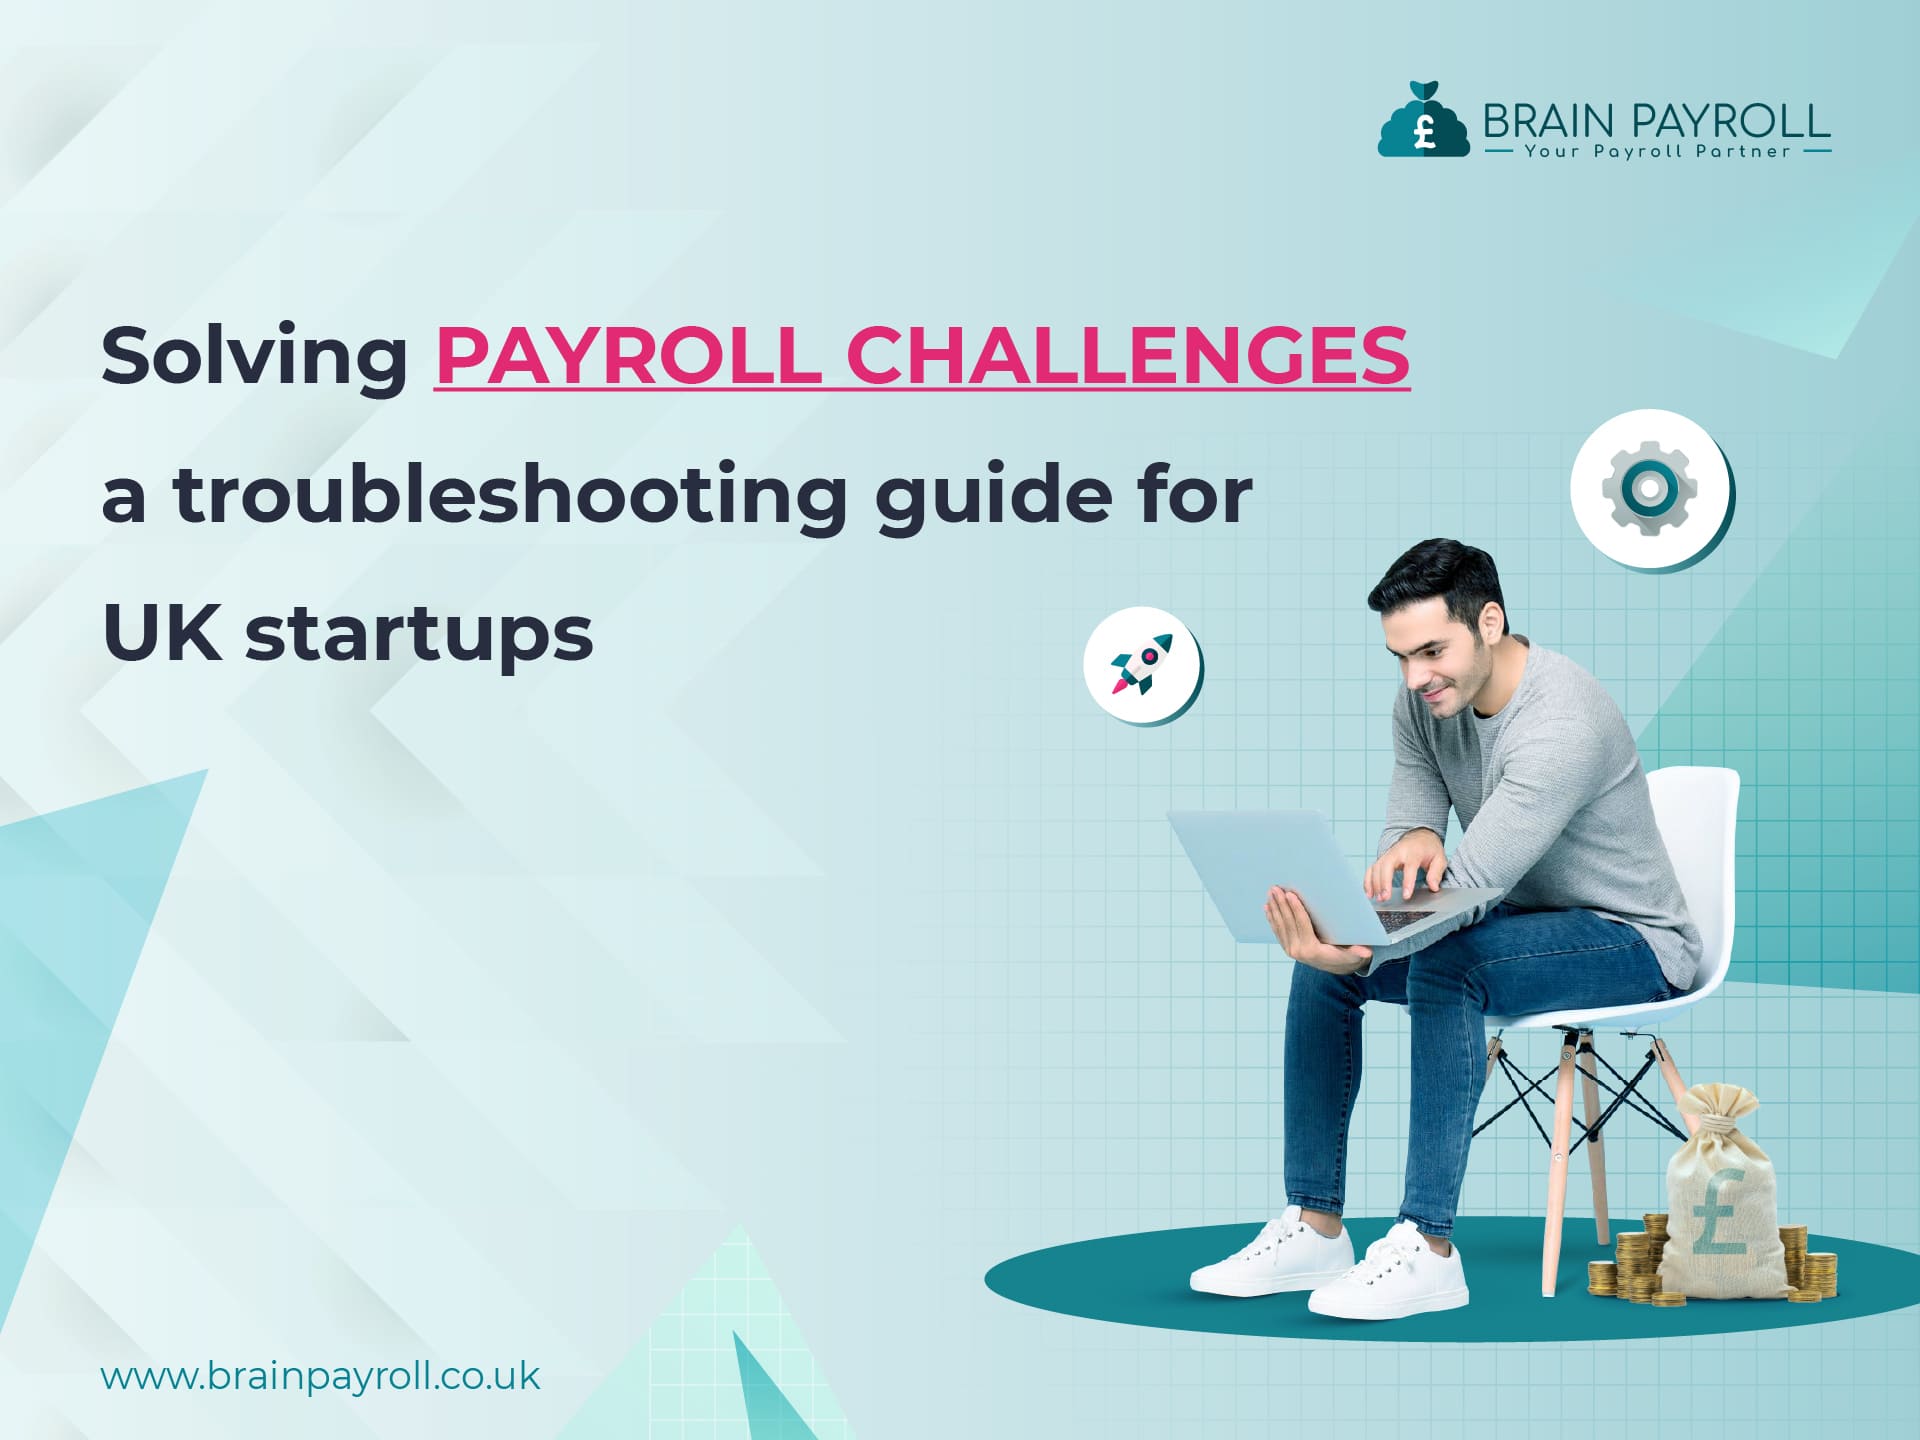 Solving Payroll Challenges - A Troubleshooting Guide for UK Startups